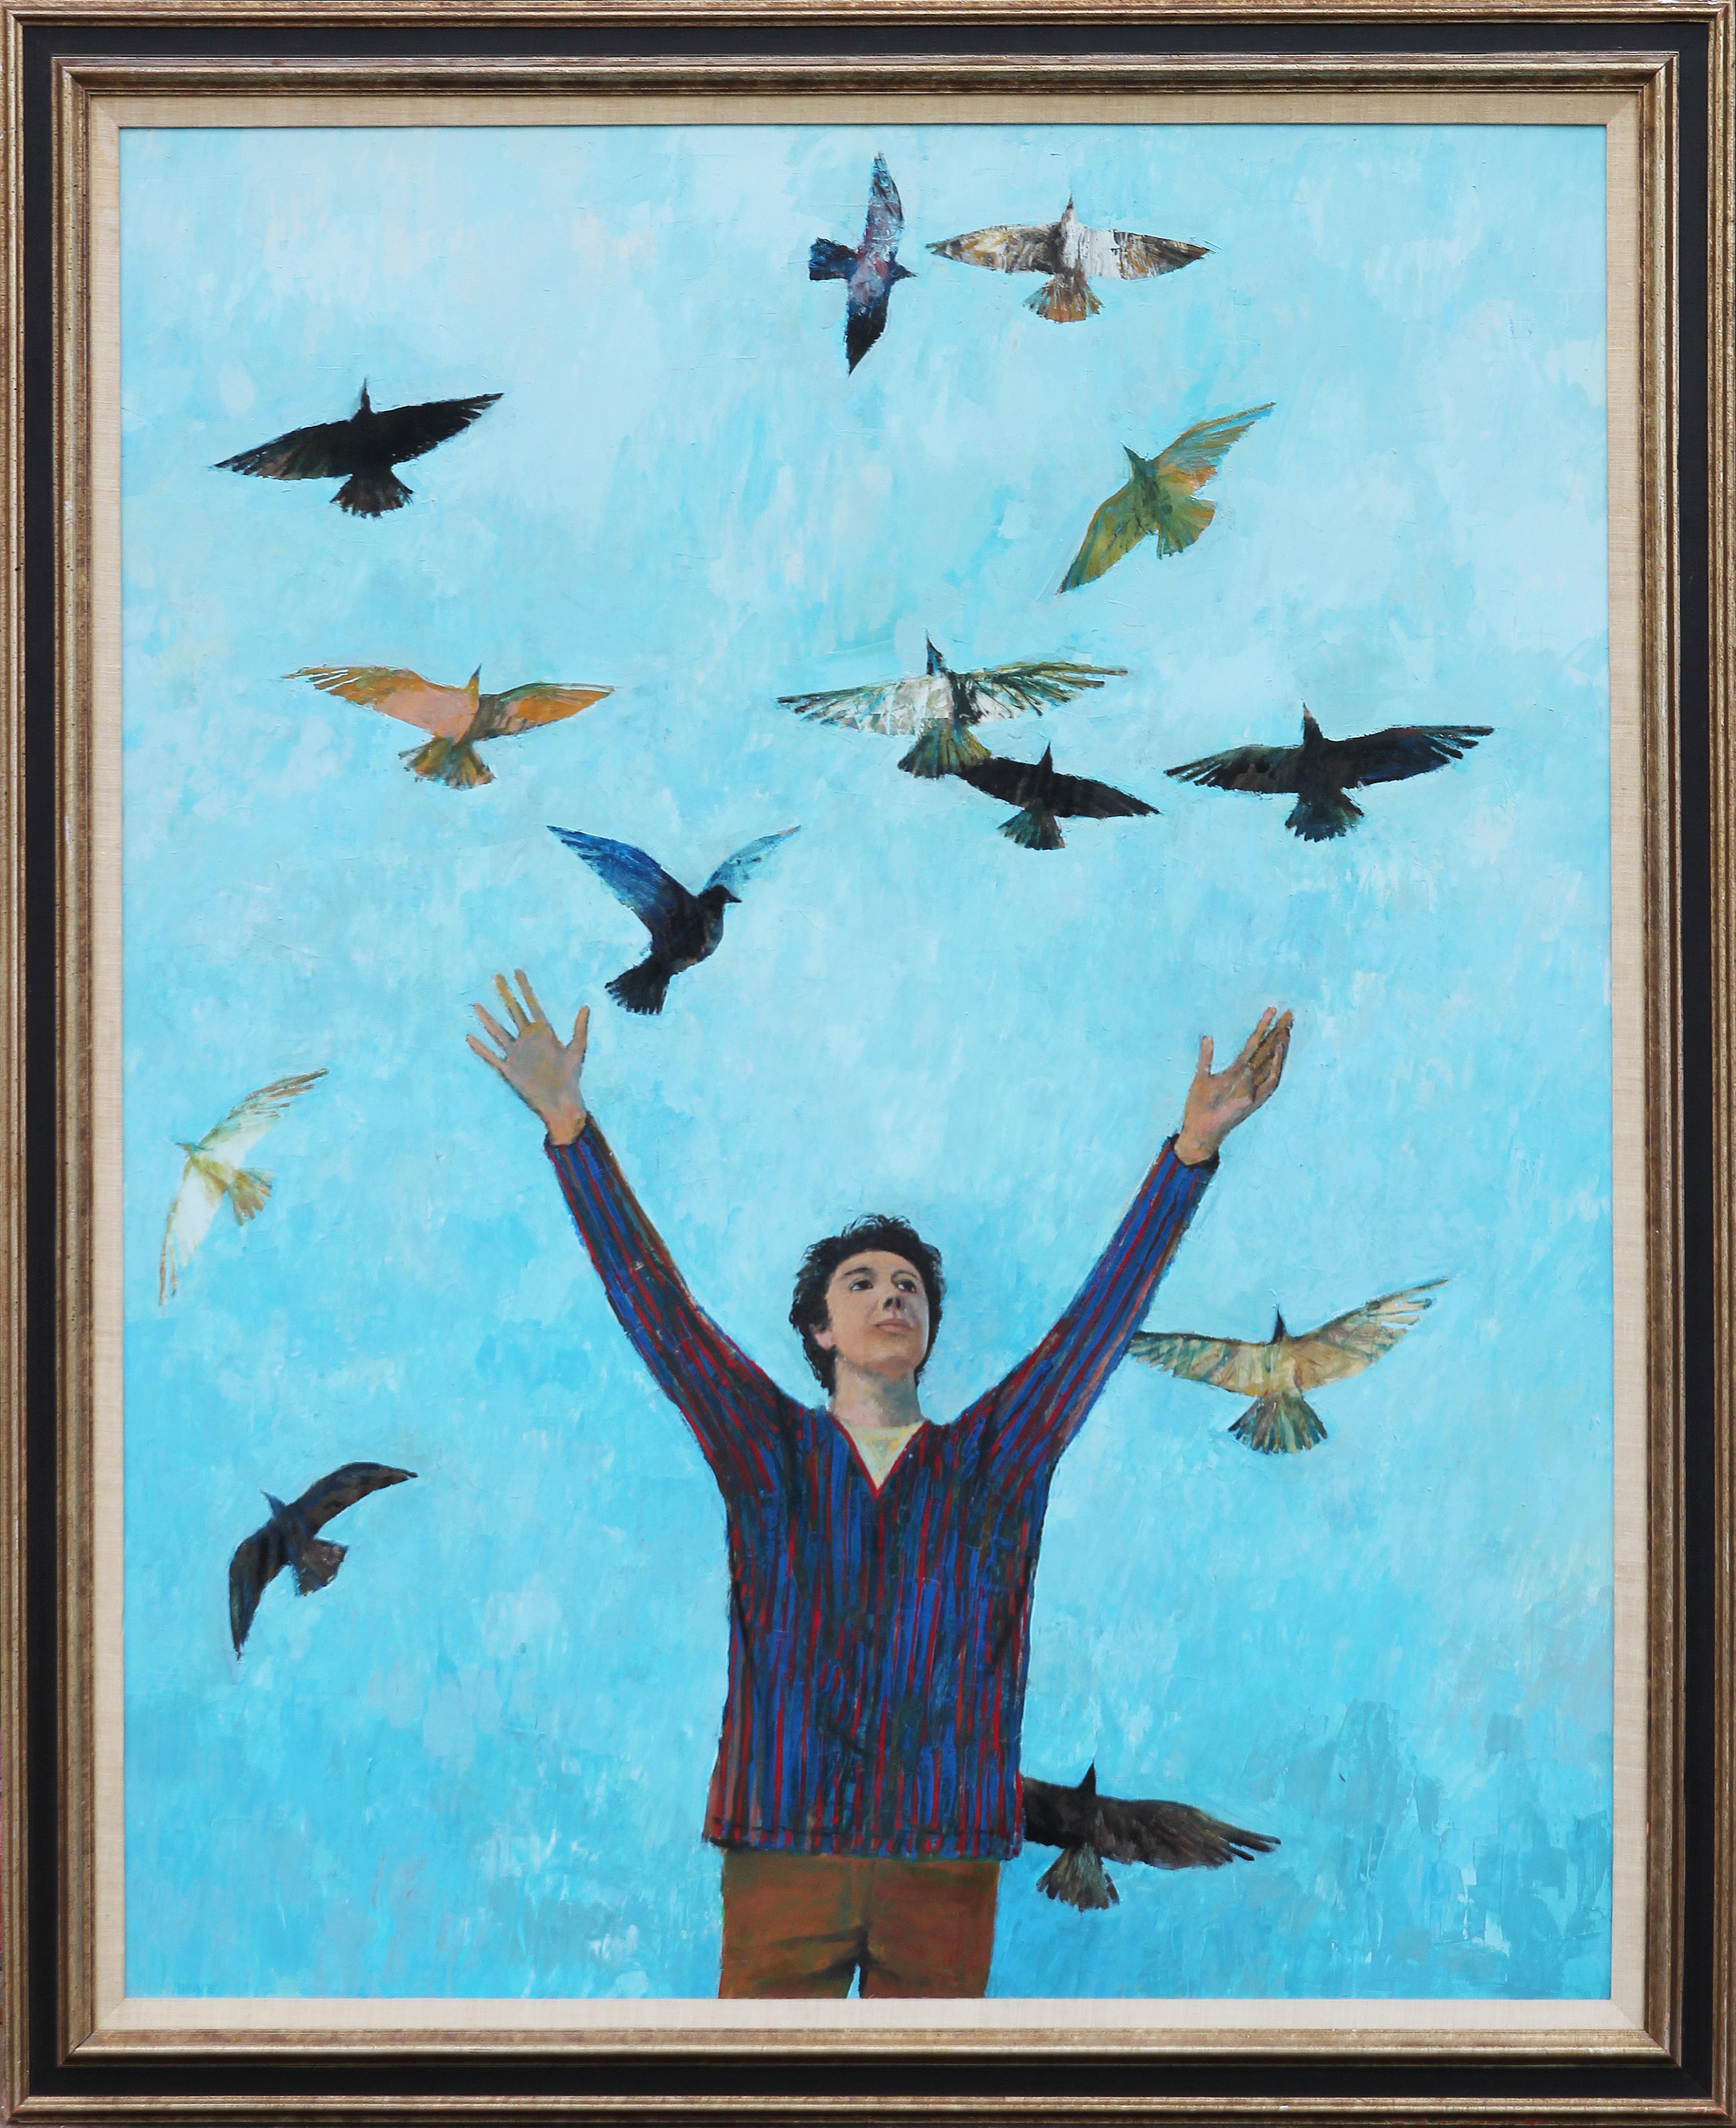 Herb Mears Abstract Painting - "Flight" Blue Abstract Figurative Painting of a Man with Flying Doves